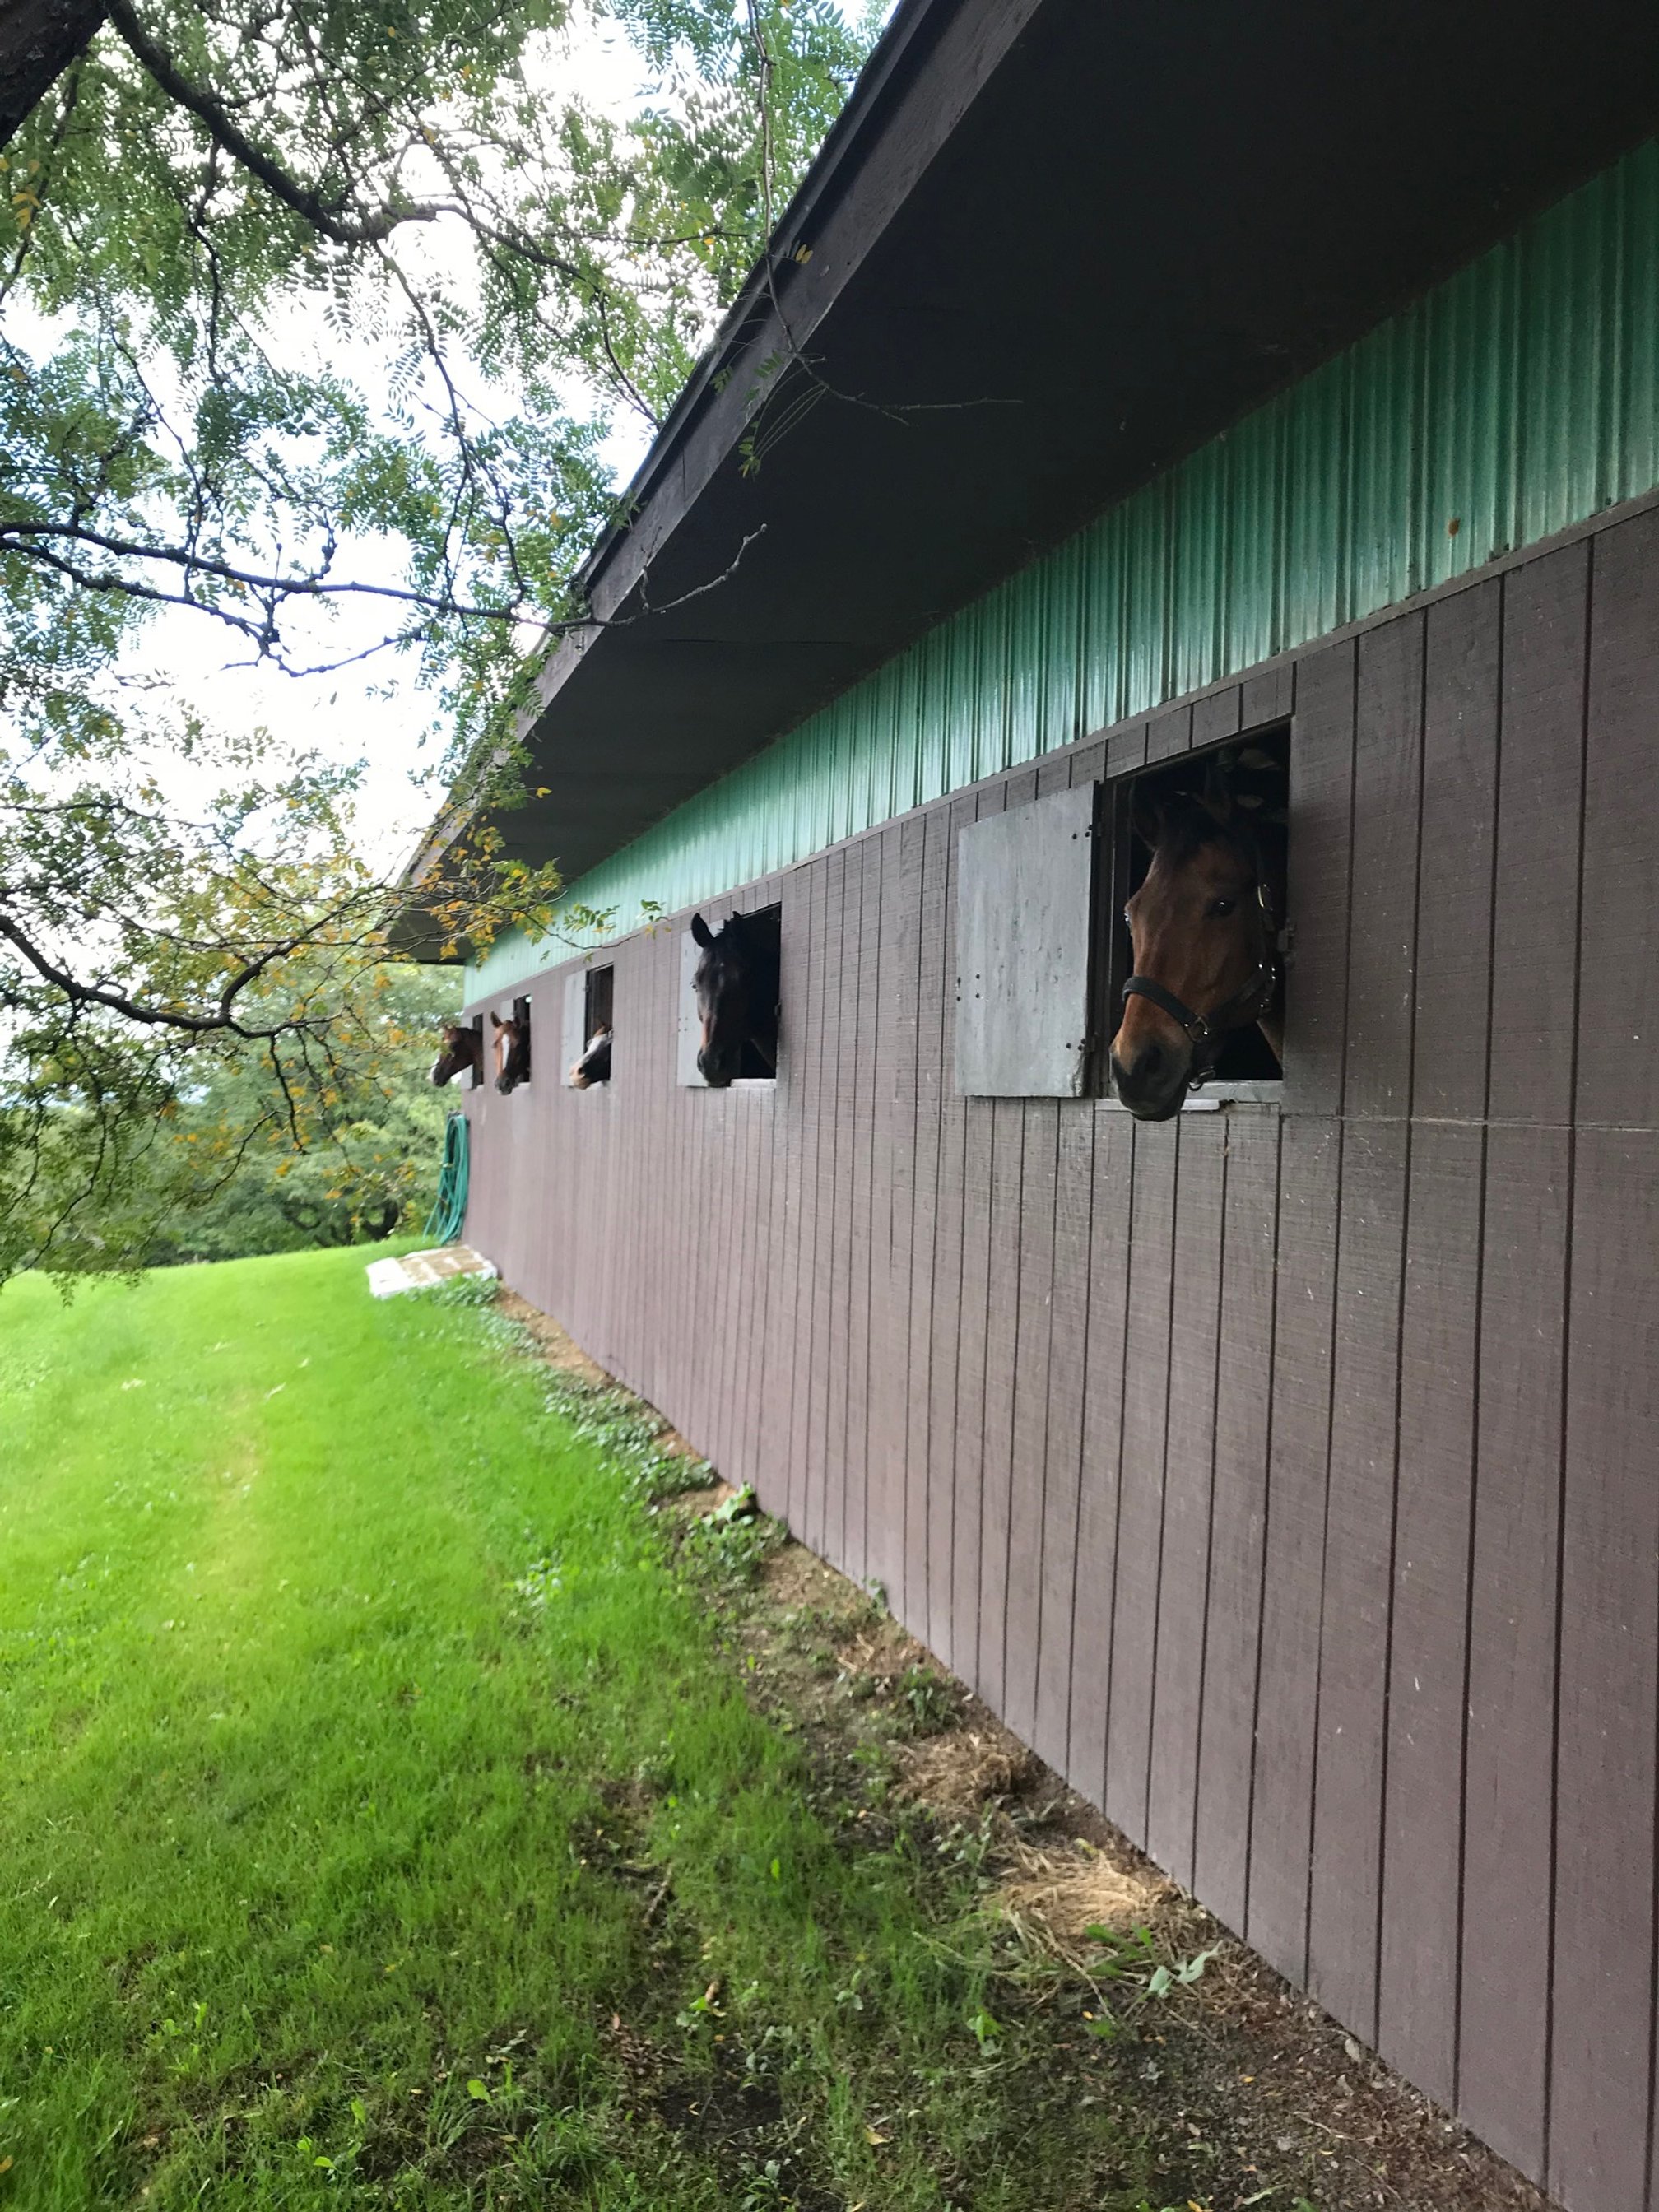  Horses Looking Out Their Windows 